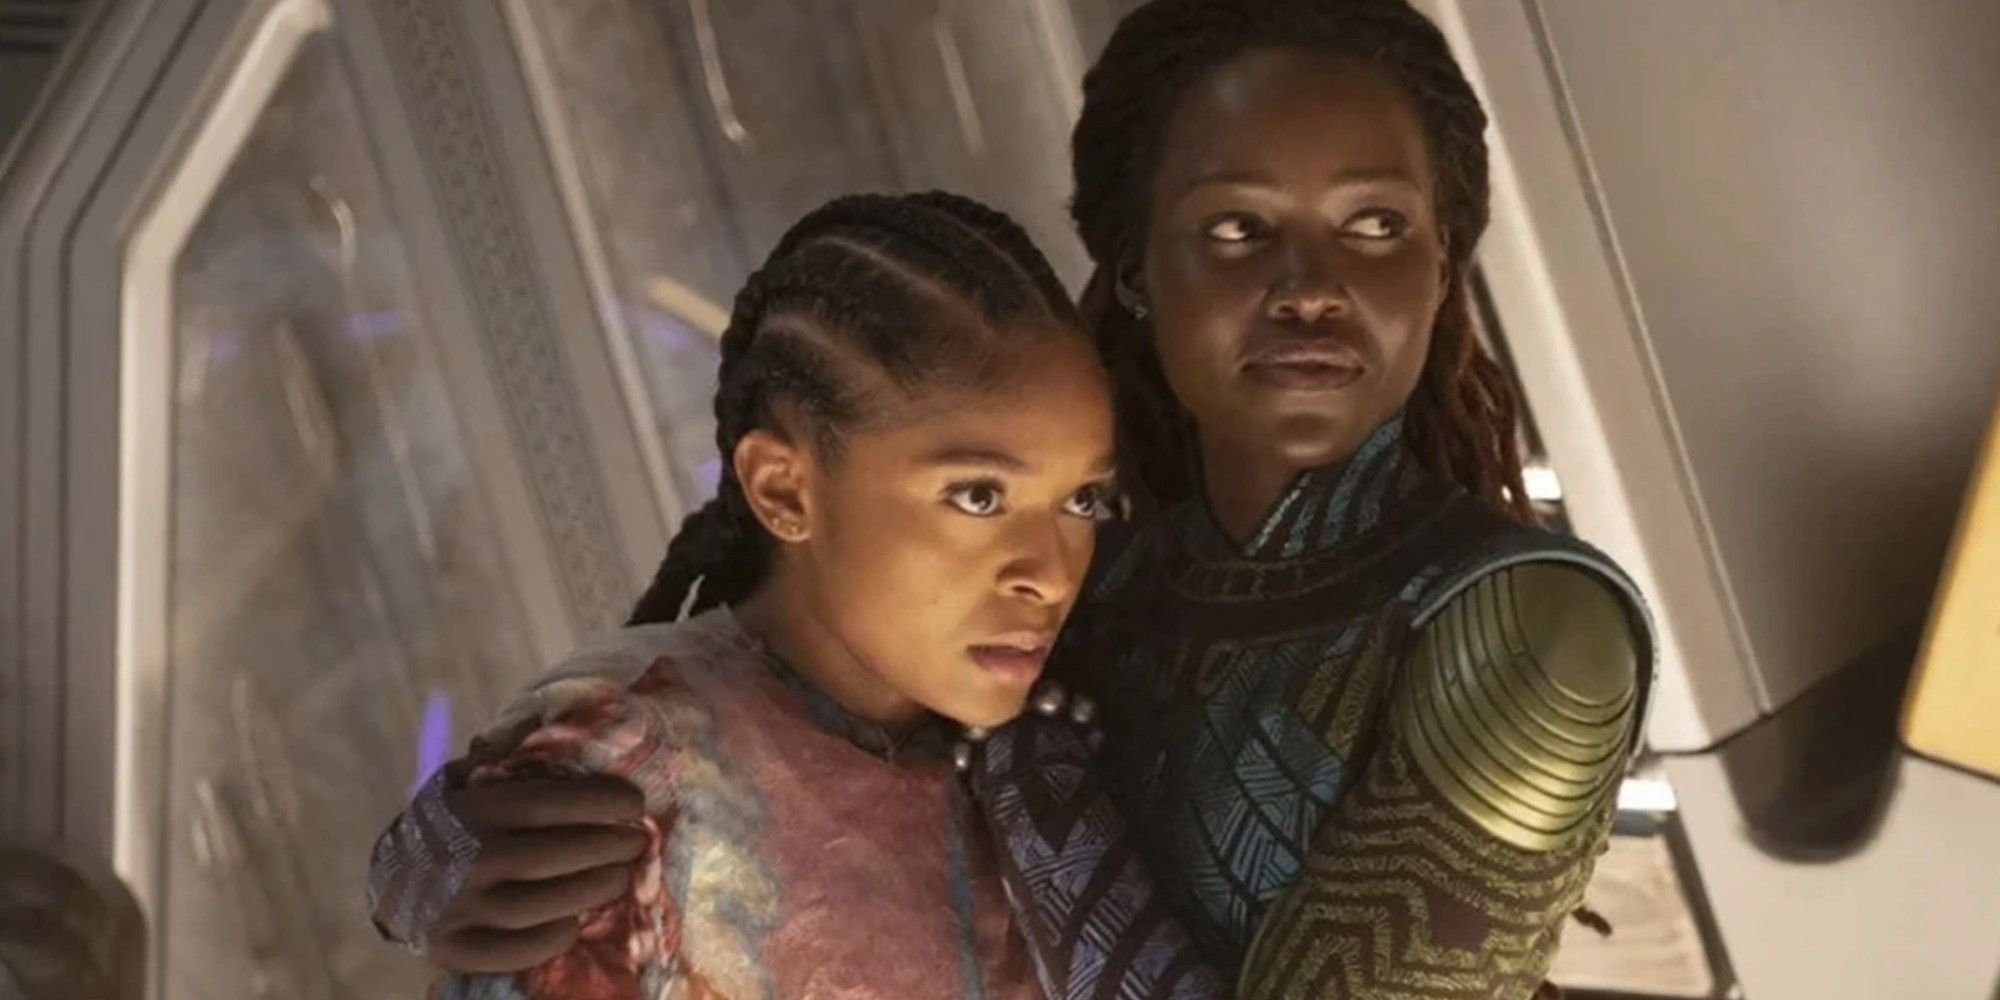 Black Panther Wakanda Forever Dominique Thorne and Lupita Nyong'o as Riri Williams and Nakia